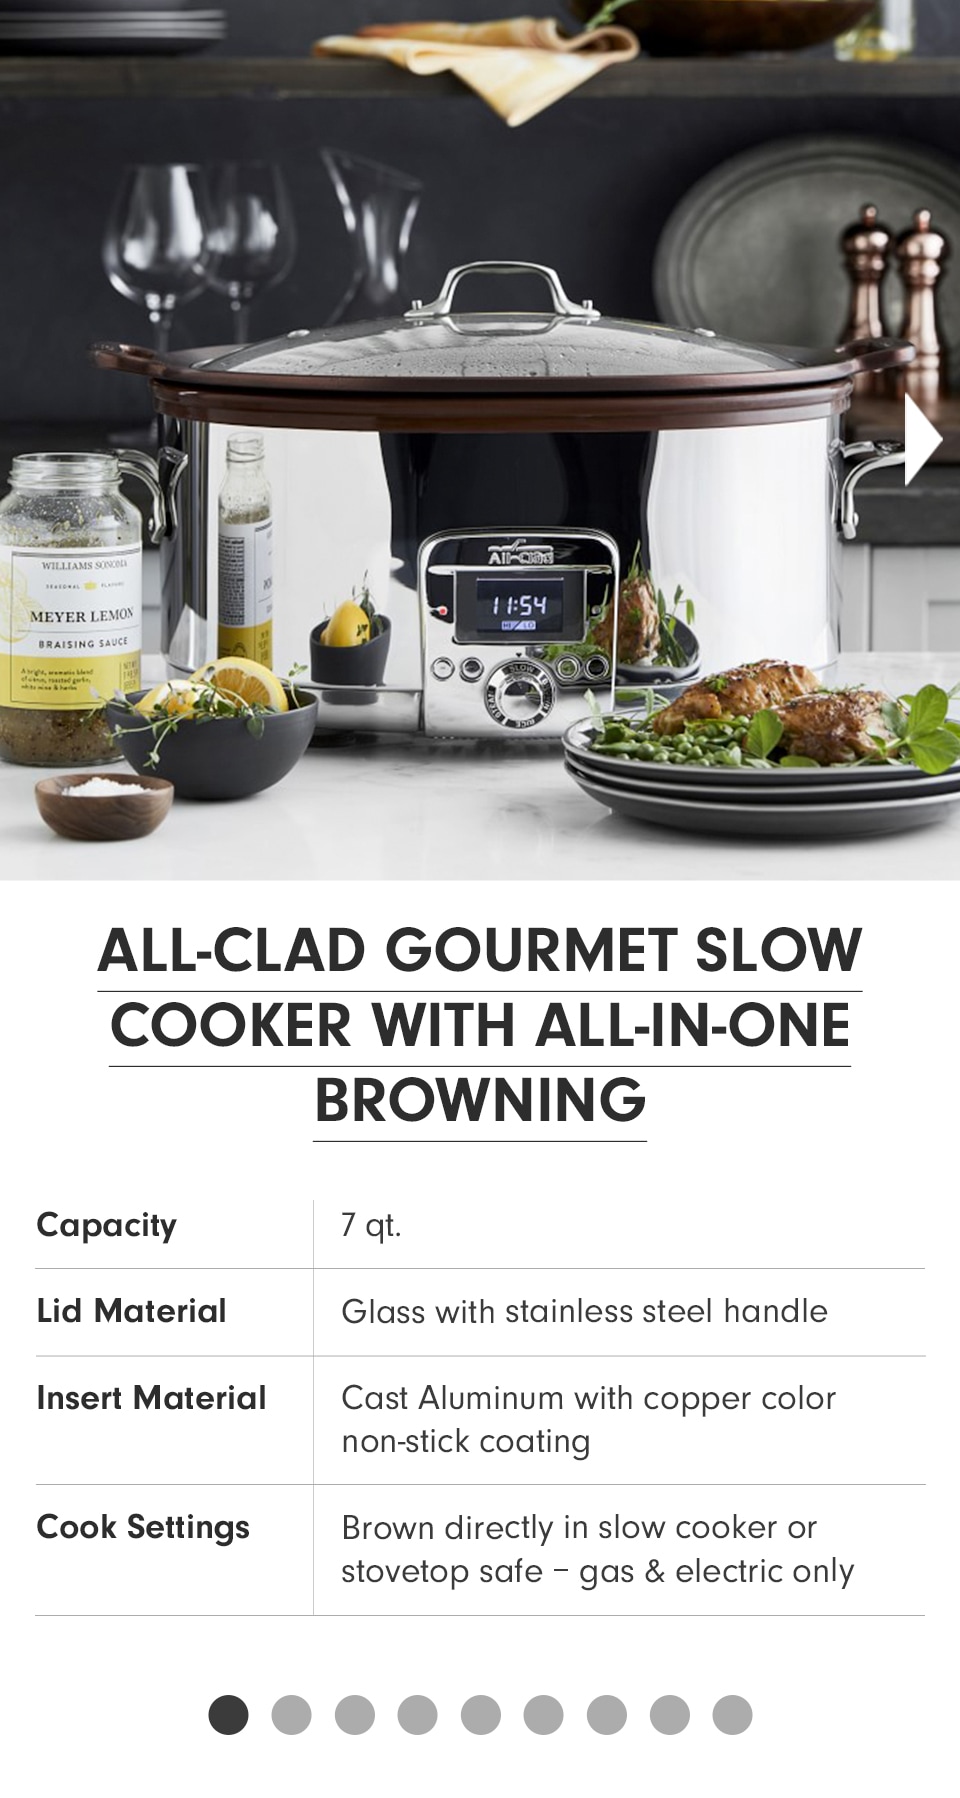 All-Clad 7-Quart Deluxe Slow Cooker